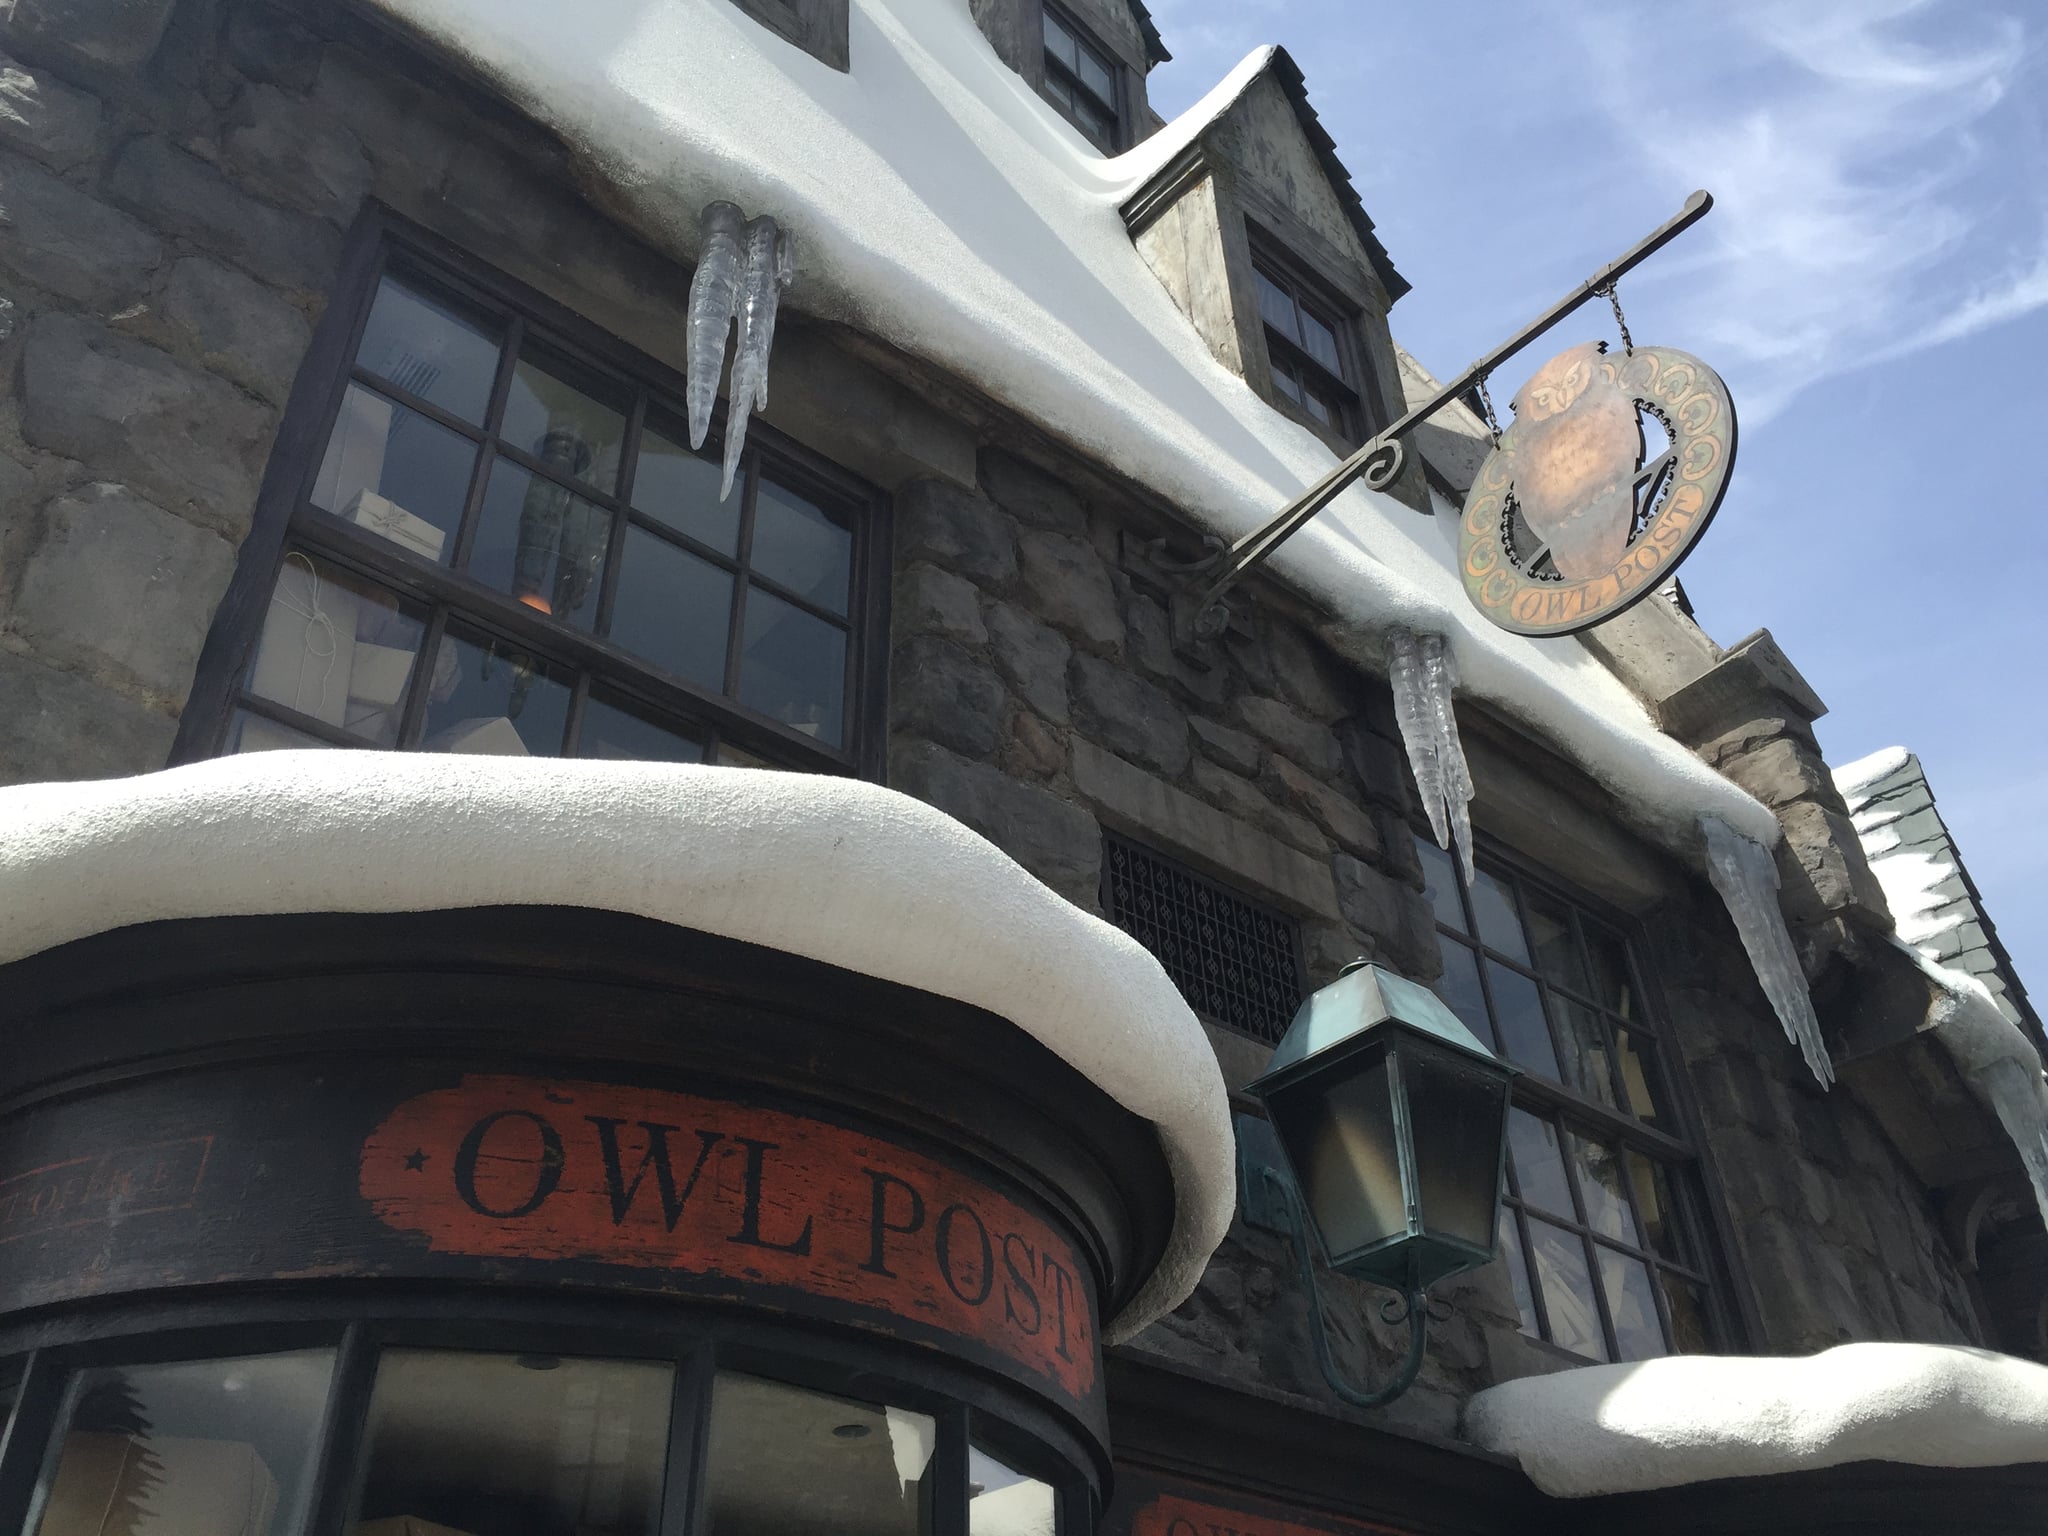 Wizarding World of Harry Potter - 25 tips, tricks and secrets to